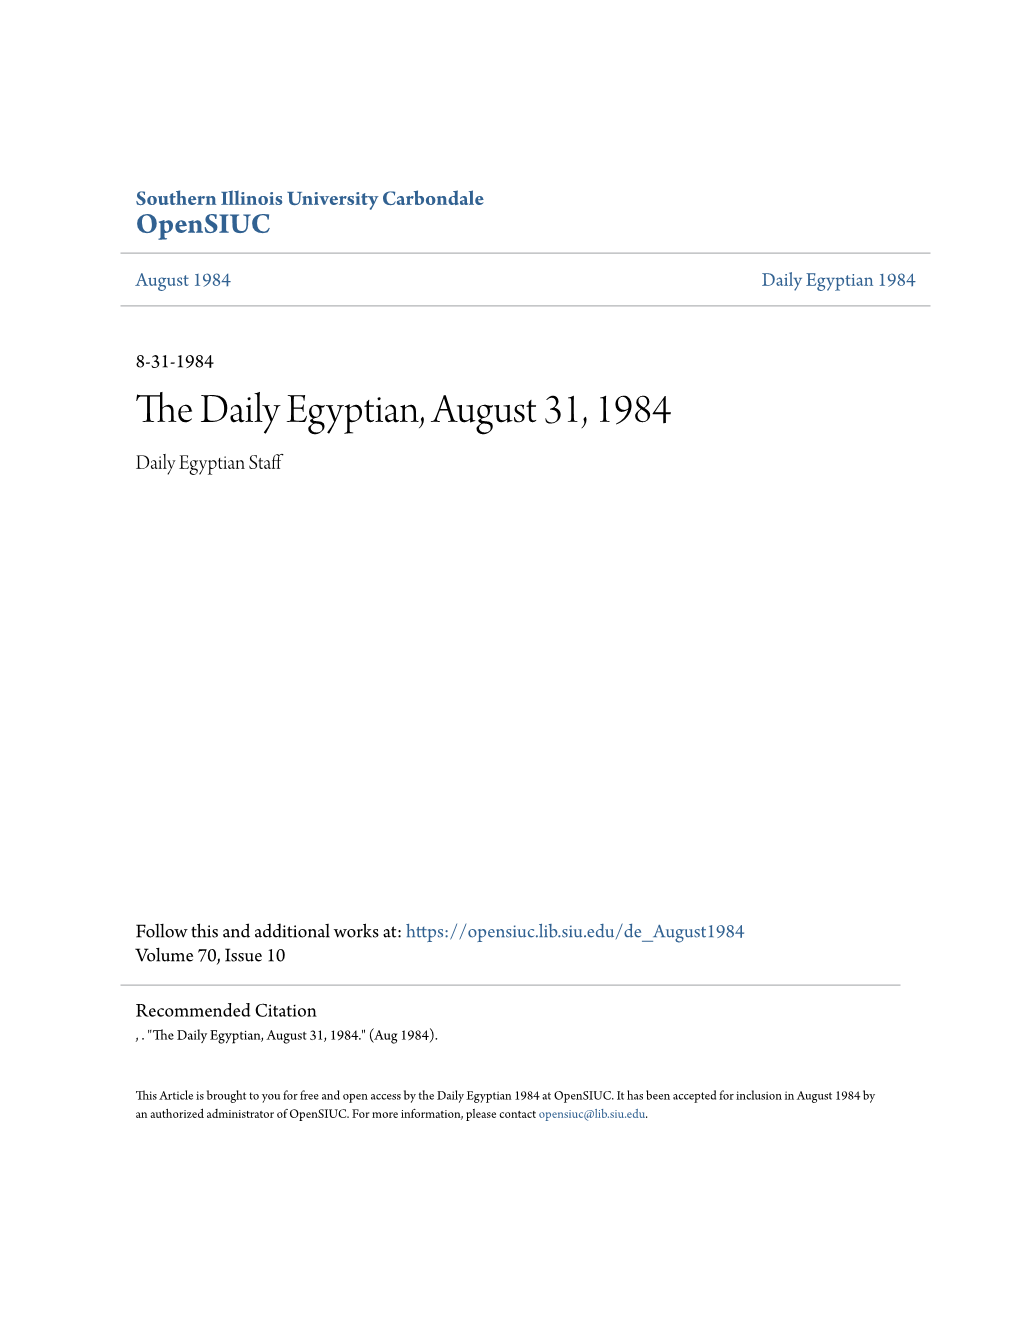 The Daily Egyptian, August 31, 1984